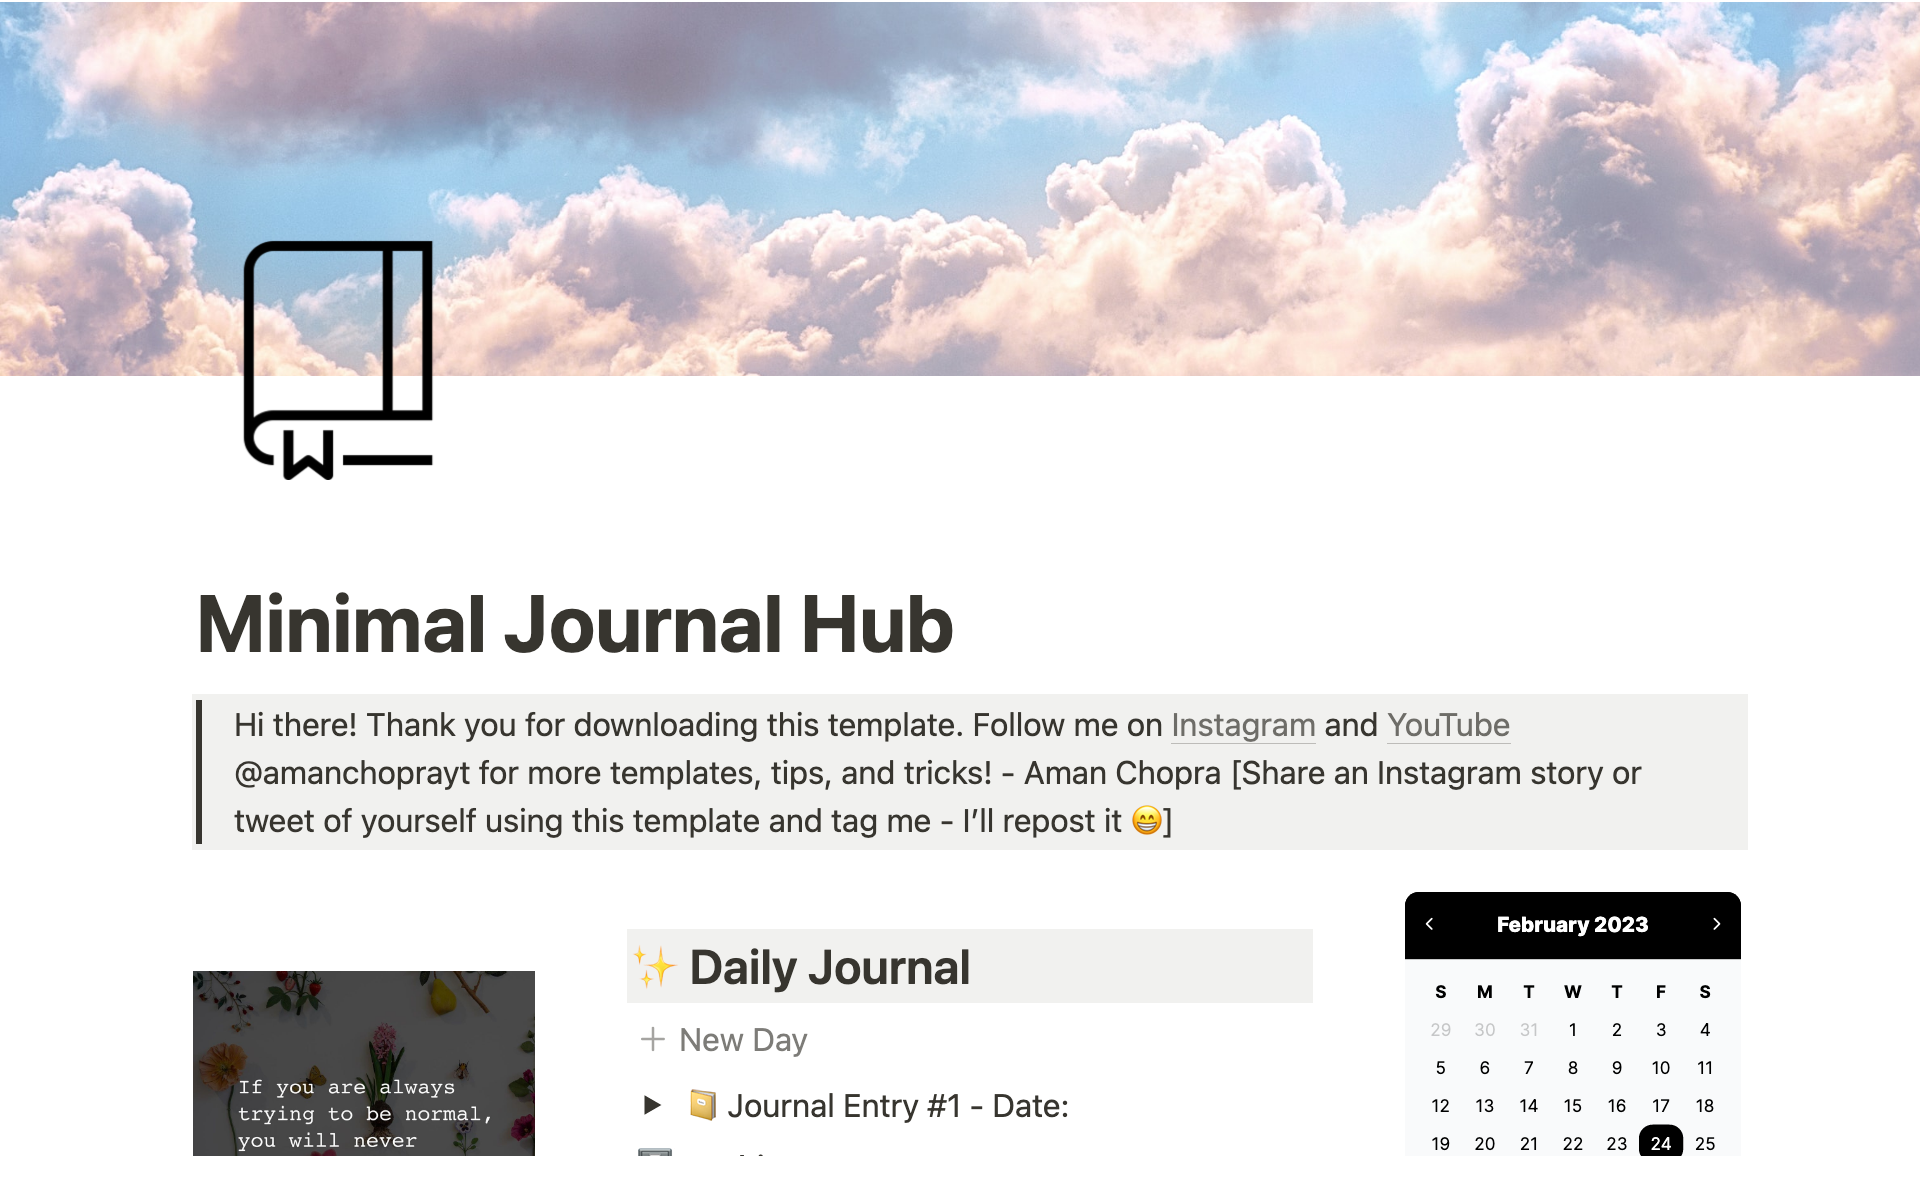 This template allows users to maintain balance in their busy lives and cultivate positivity through meaningful daily morning and night journal entries.